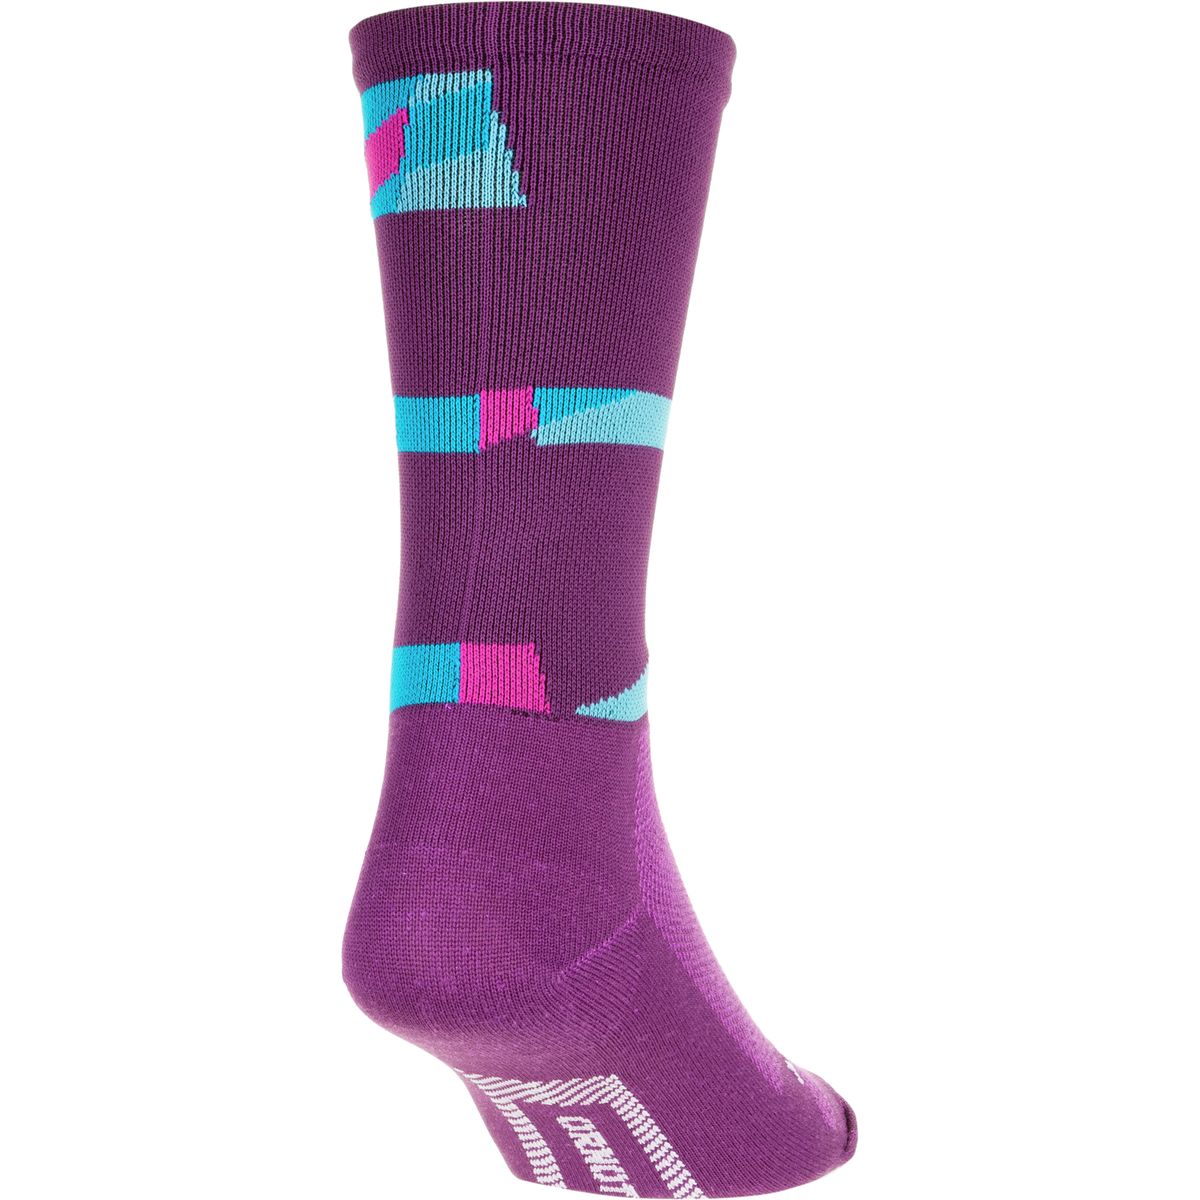 DeFeet Ornot Aireator 6in Sock | Backcountry.com